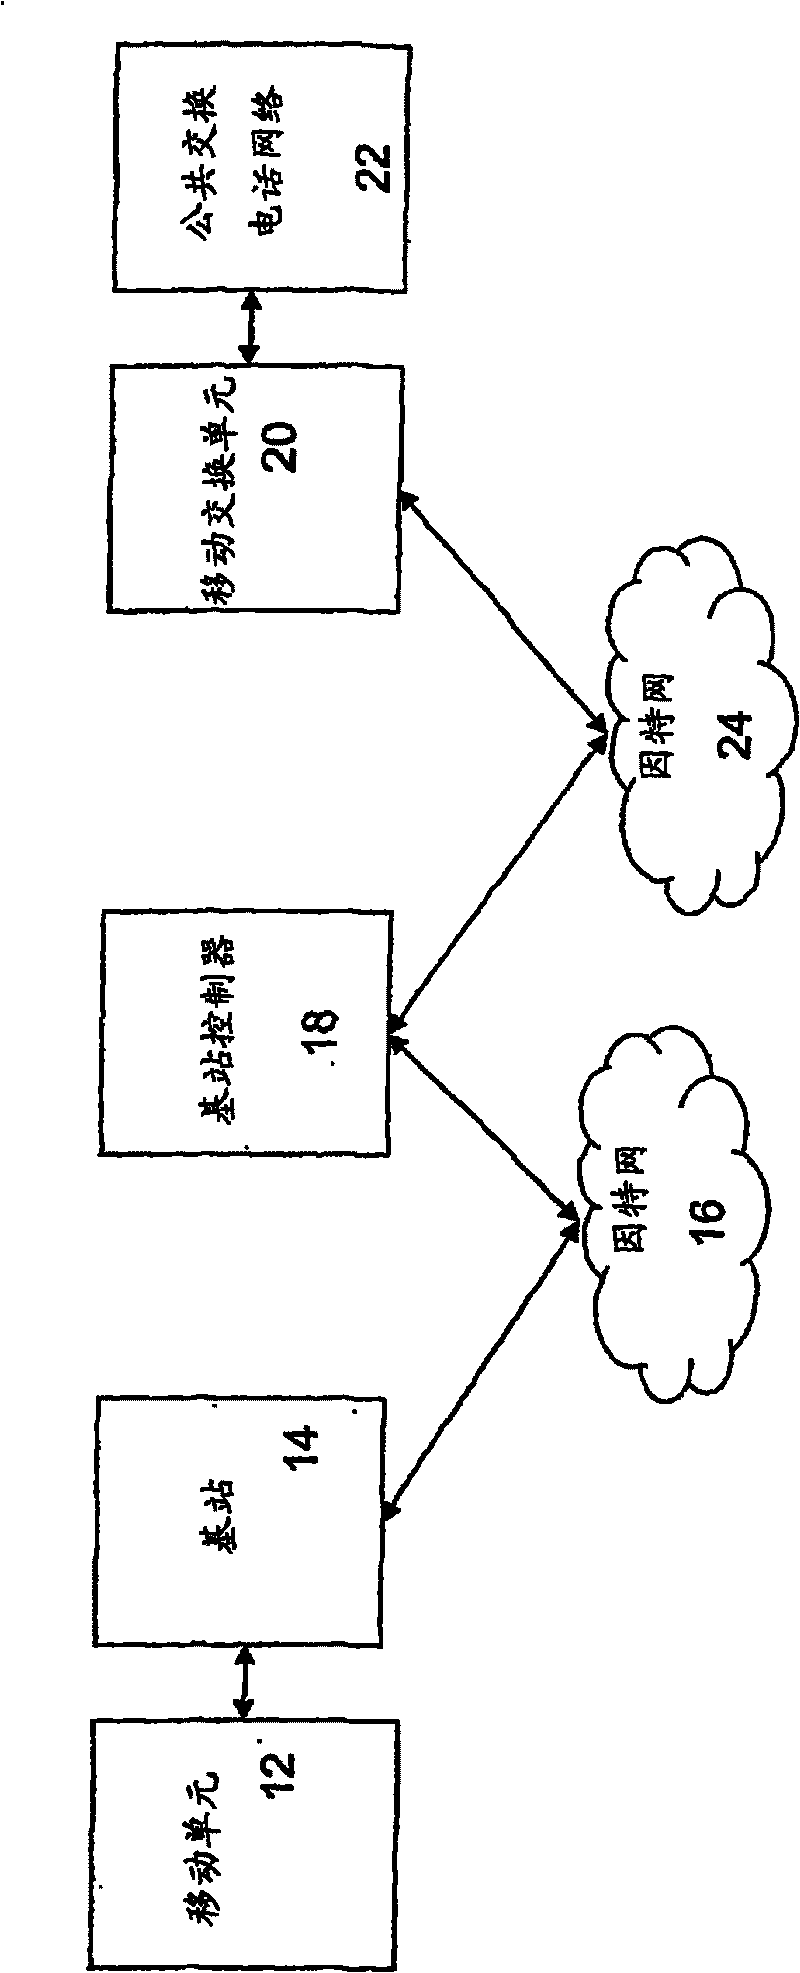 Method and system for wireless voice and data transmission backhaul